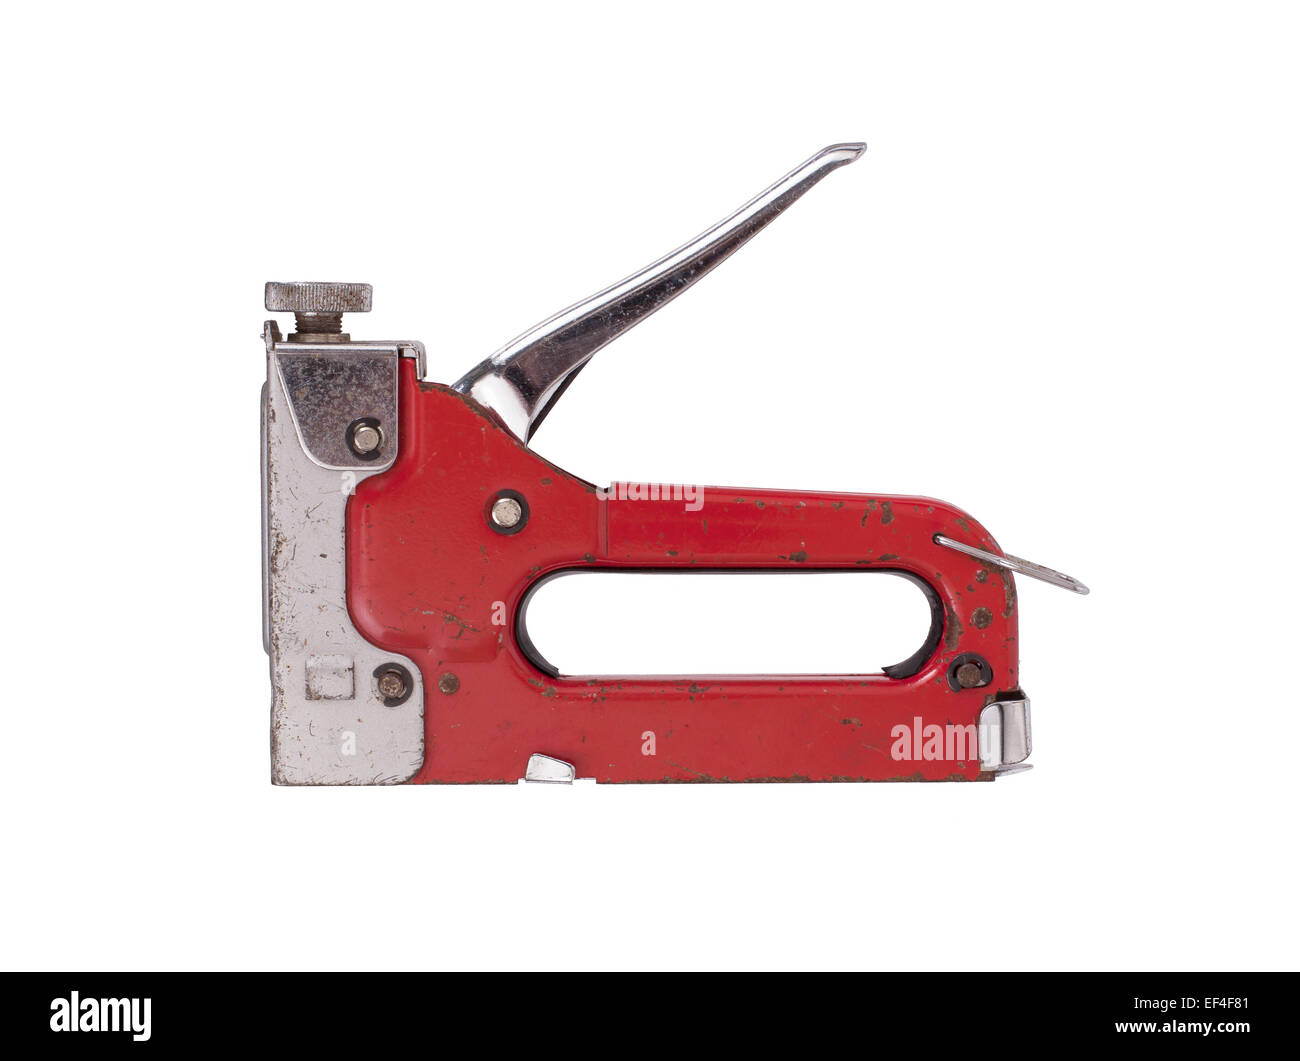 Construction hand-held stapler, isolated on white background, red Stock Photo